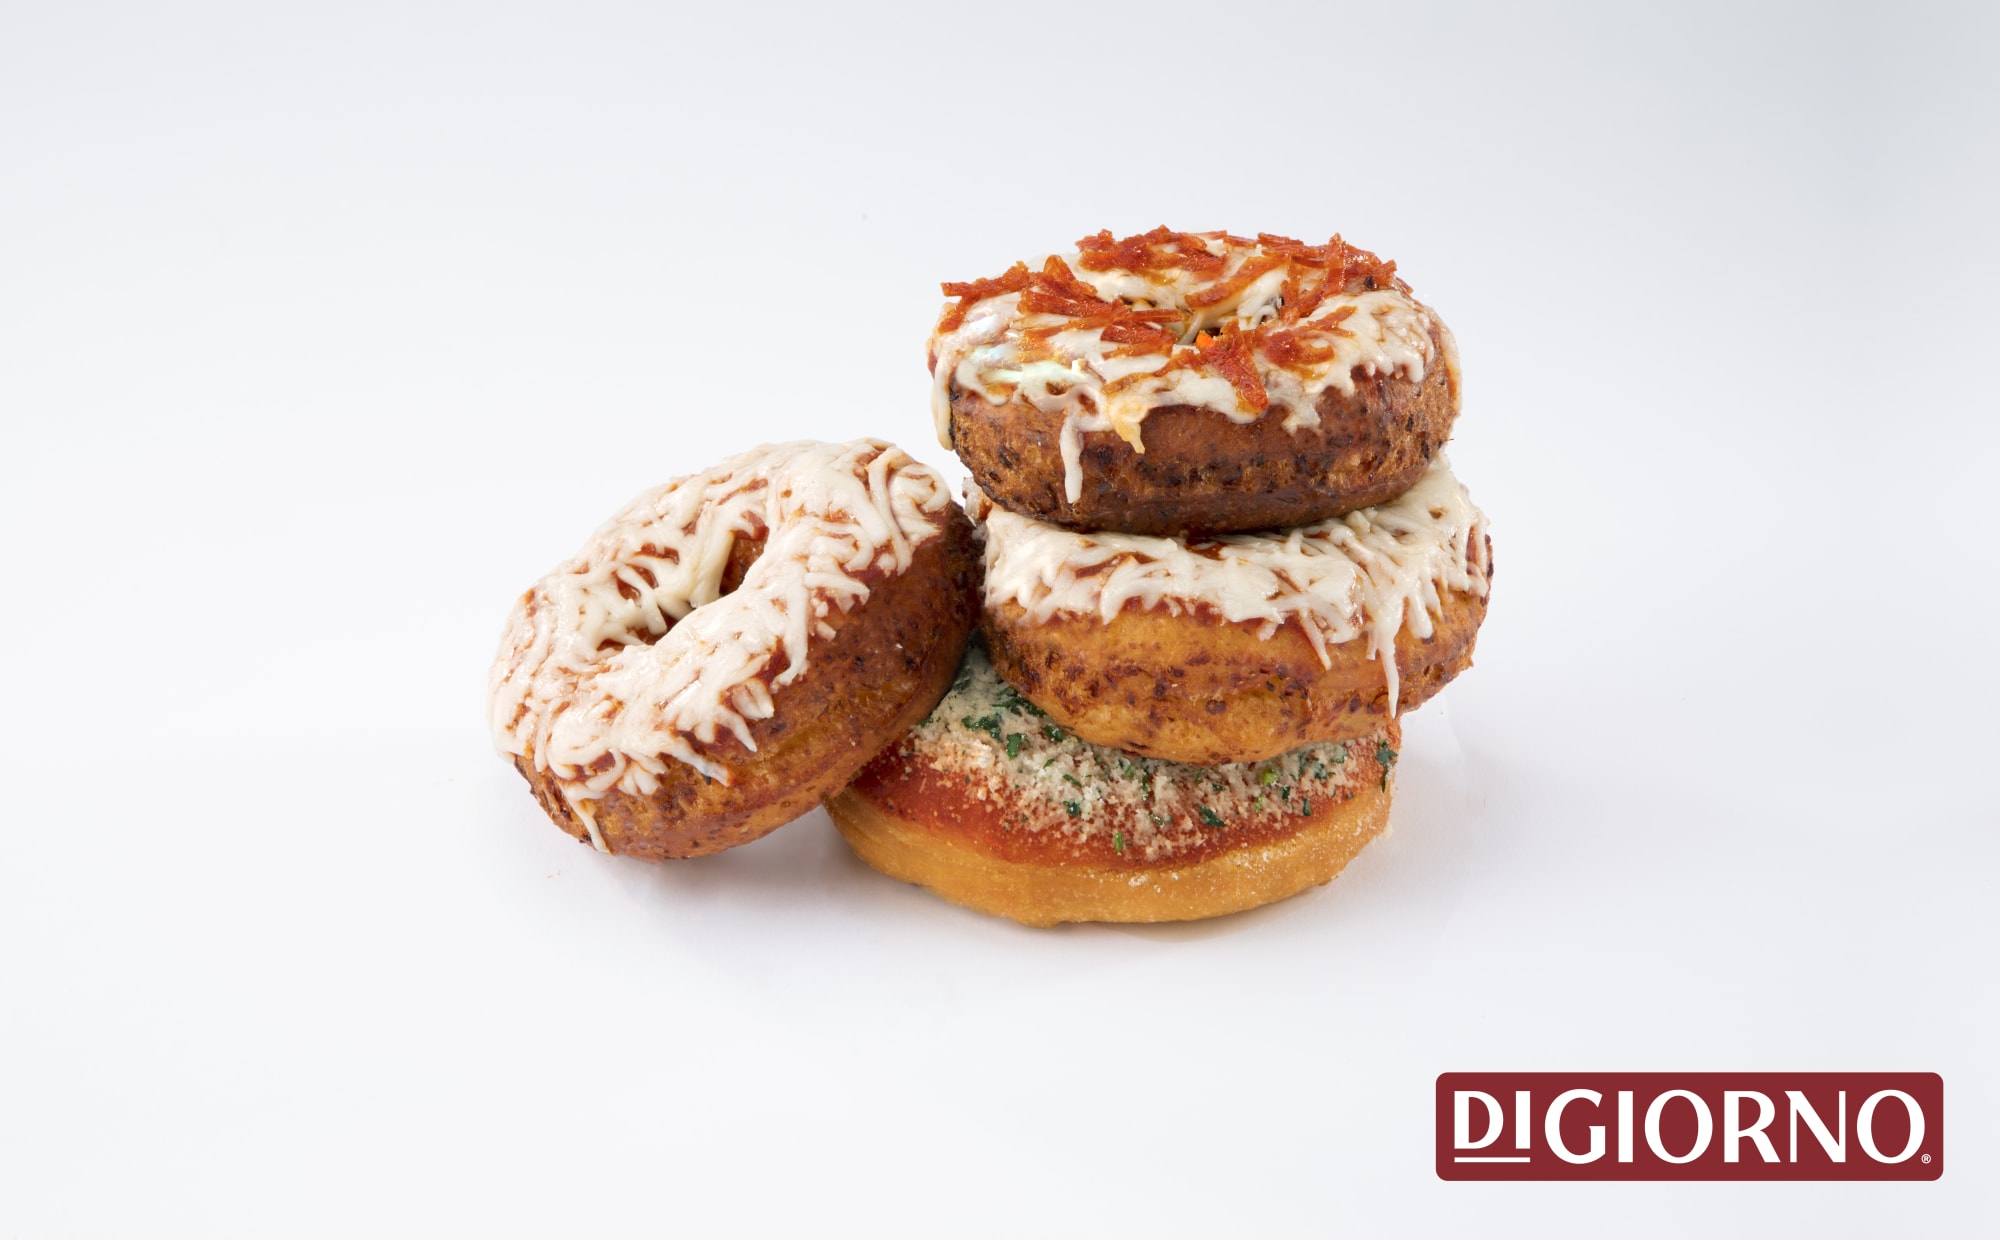 Are pizza donuts the next must have trending food mash-up?